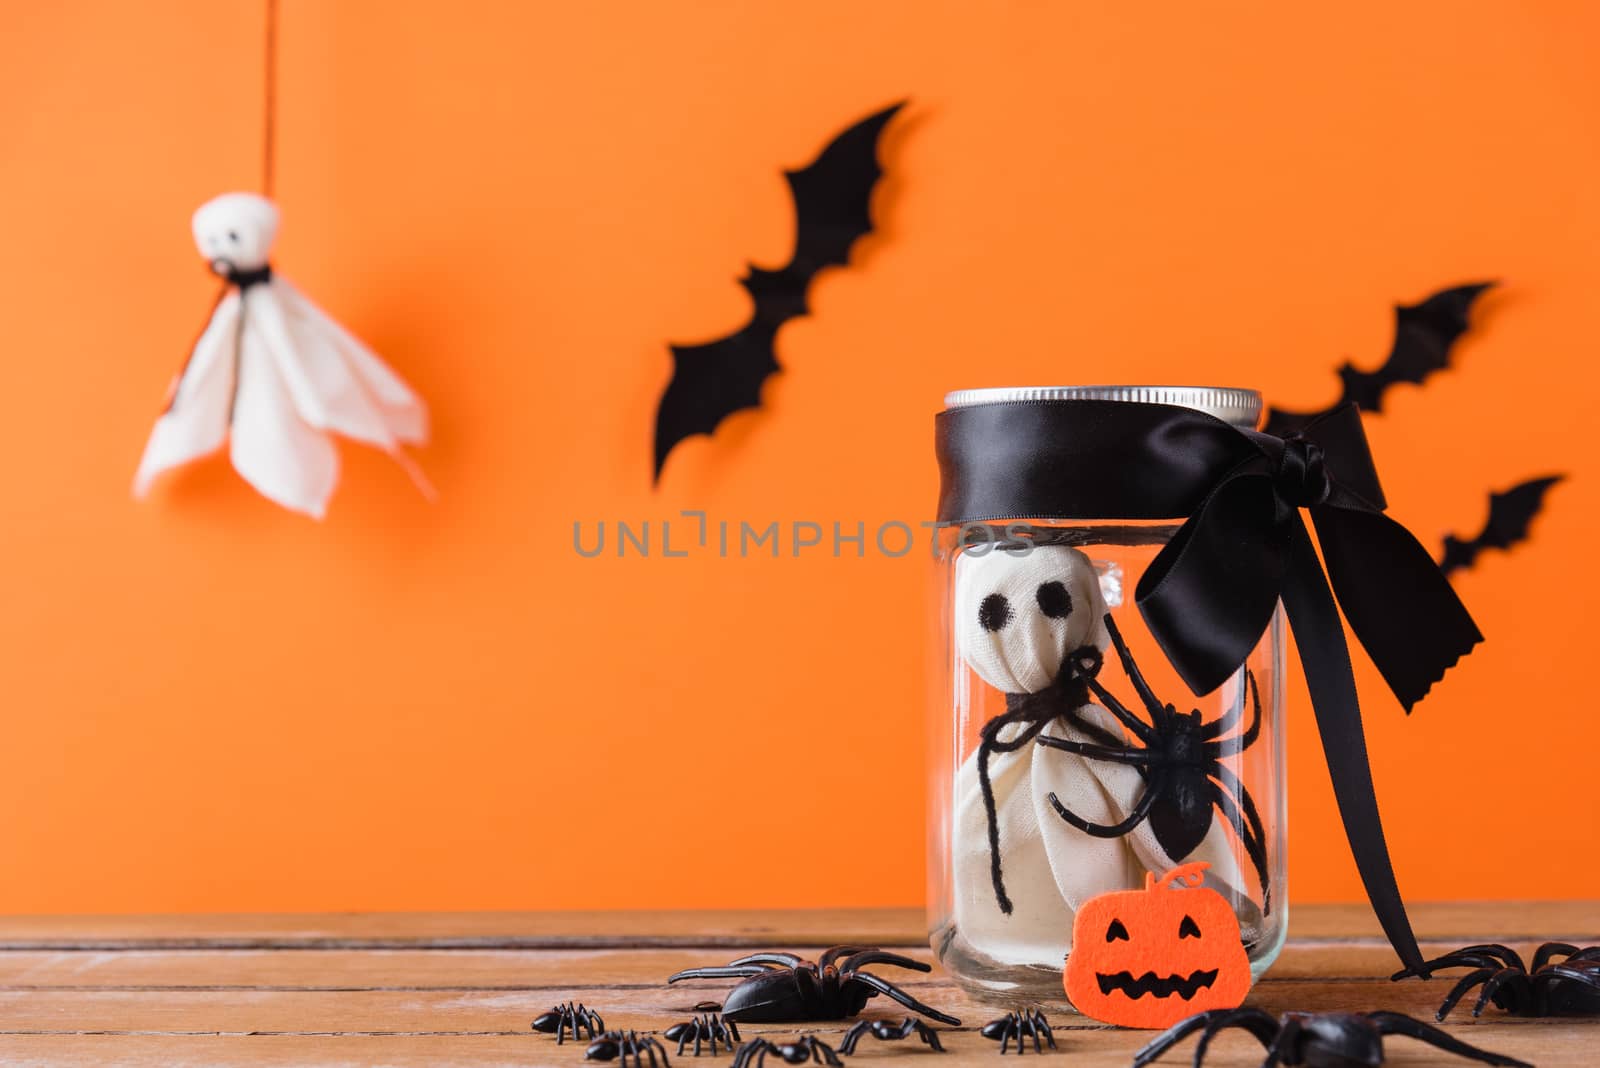 Funny Halloween day decoration party, Baby white ghost crafts scary face in jar glass on wood table, studio shot isolated on orange background have spider and bats, Happy holiday DIY concept